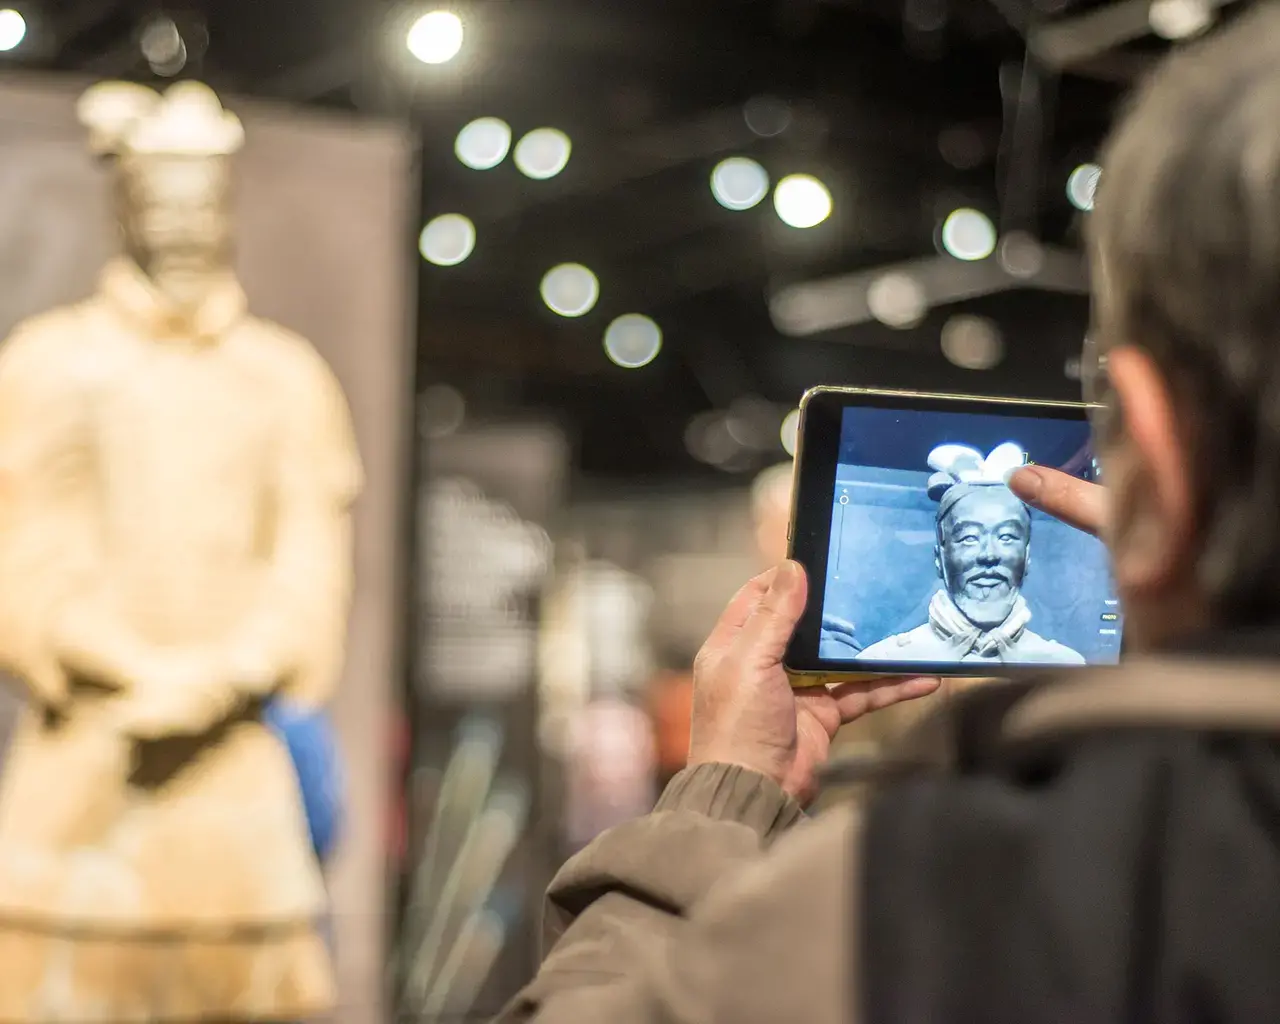 Terracotta Warriors of the First Emperor, The Franklin Institute, augmented reality demonstration. Photo courtesy of The Franklin Institute.